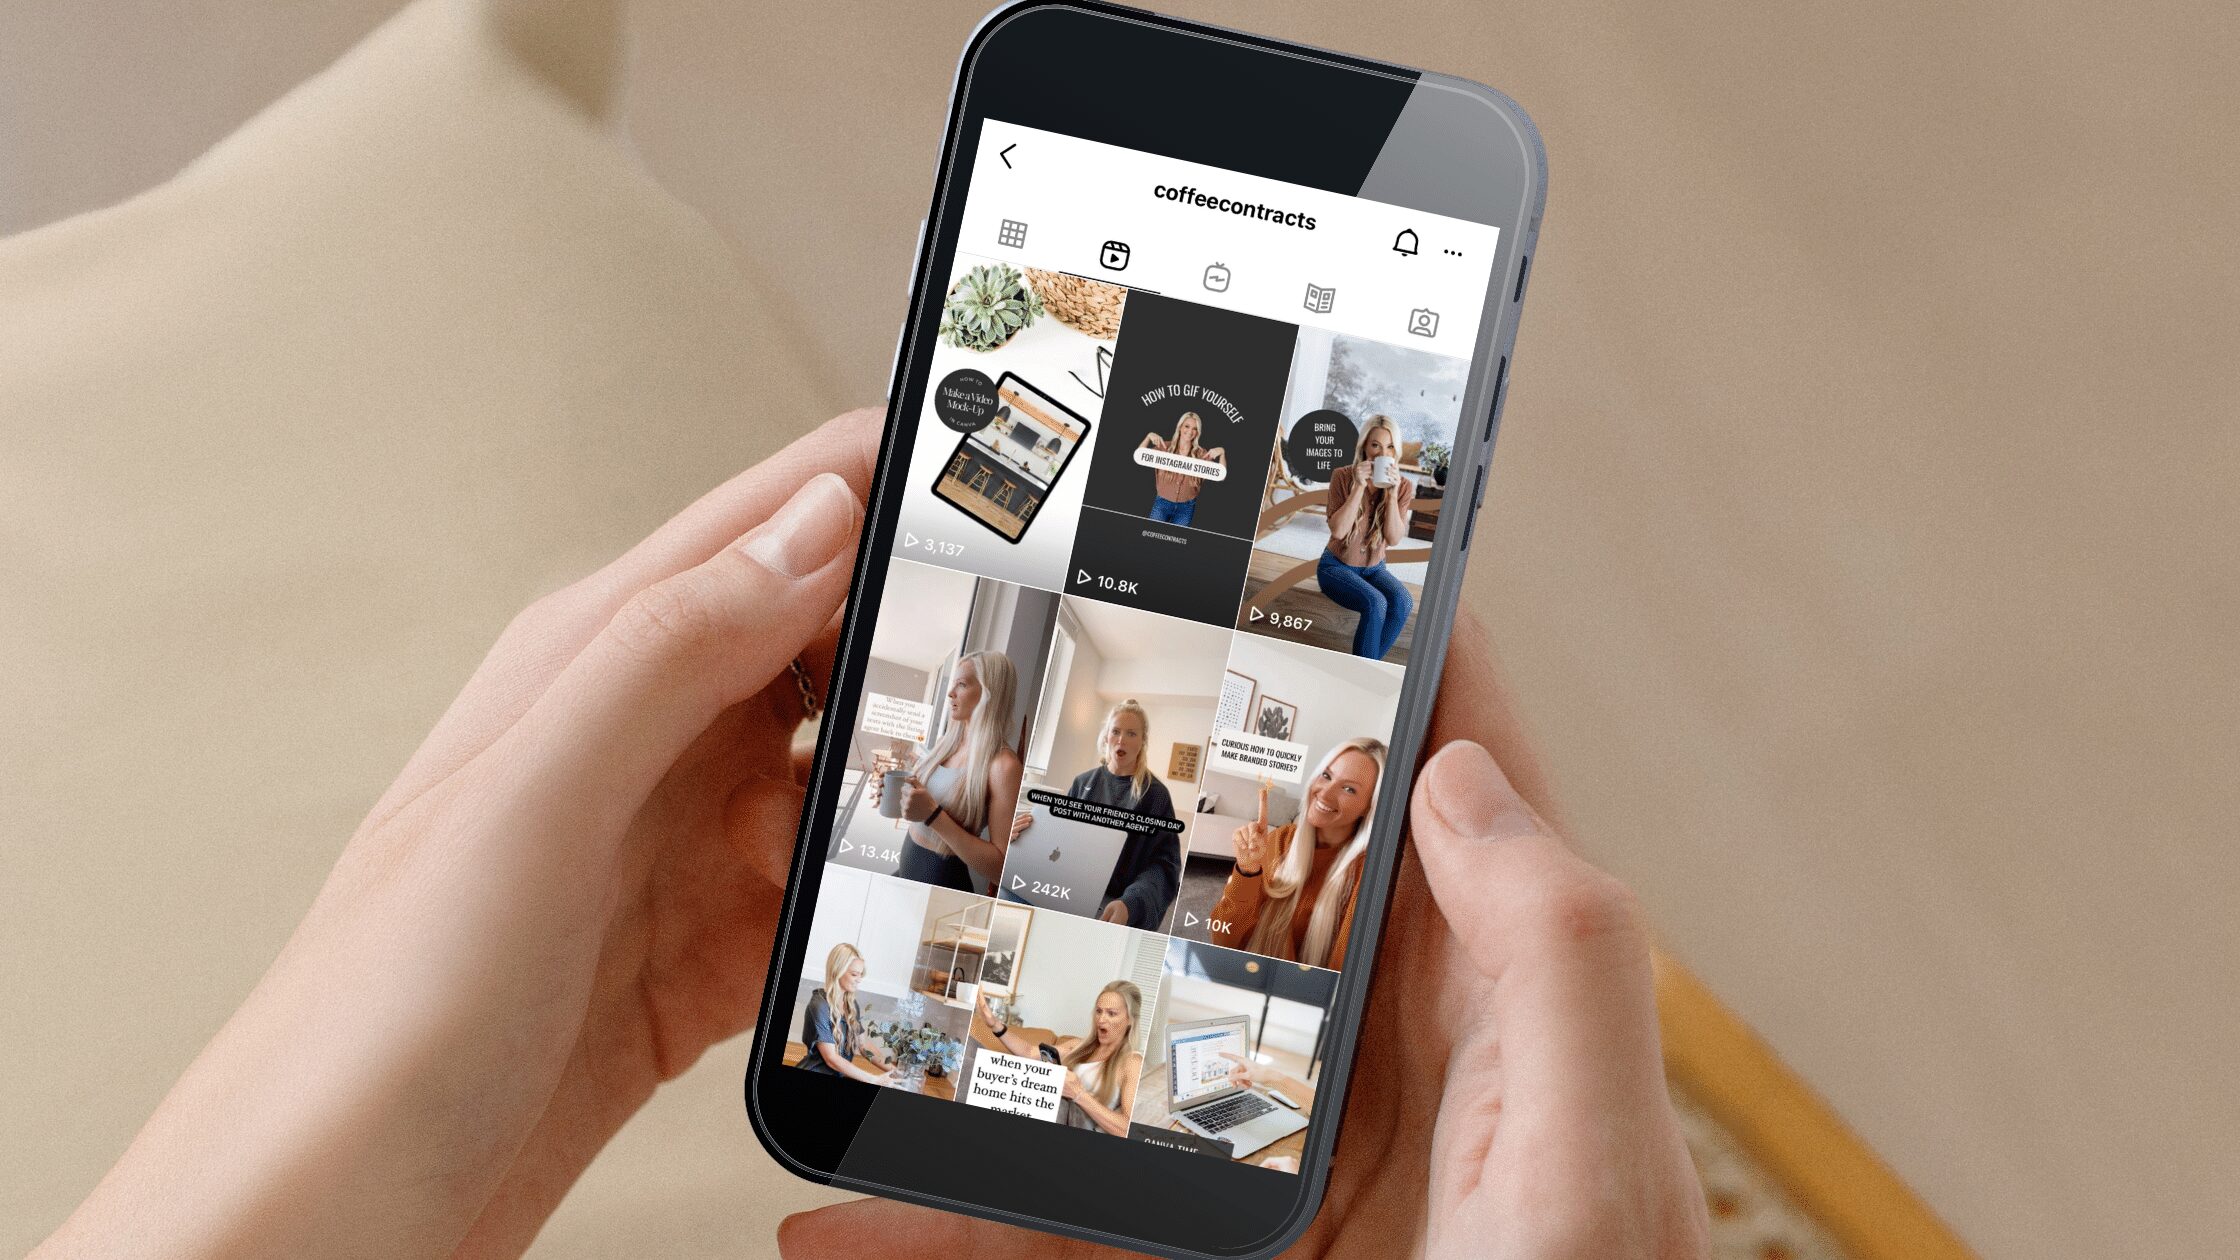 Methods to Gain More Traction Through Instagram Reels